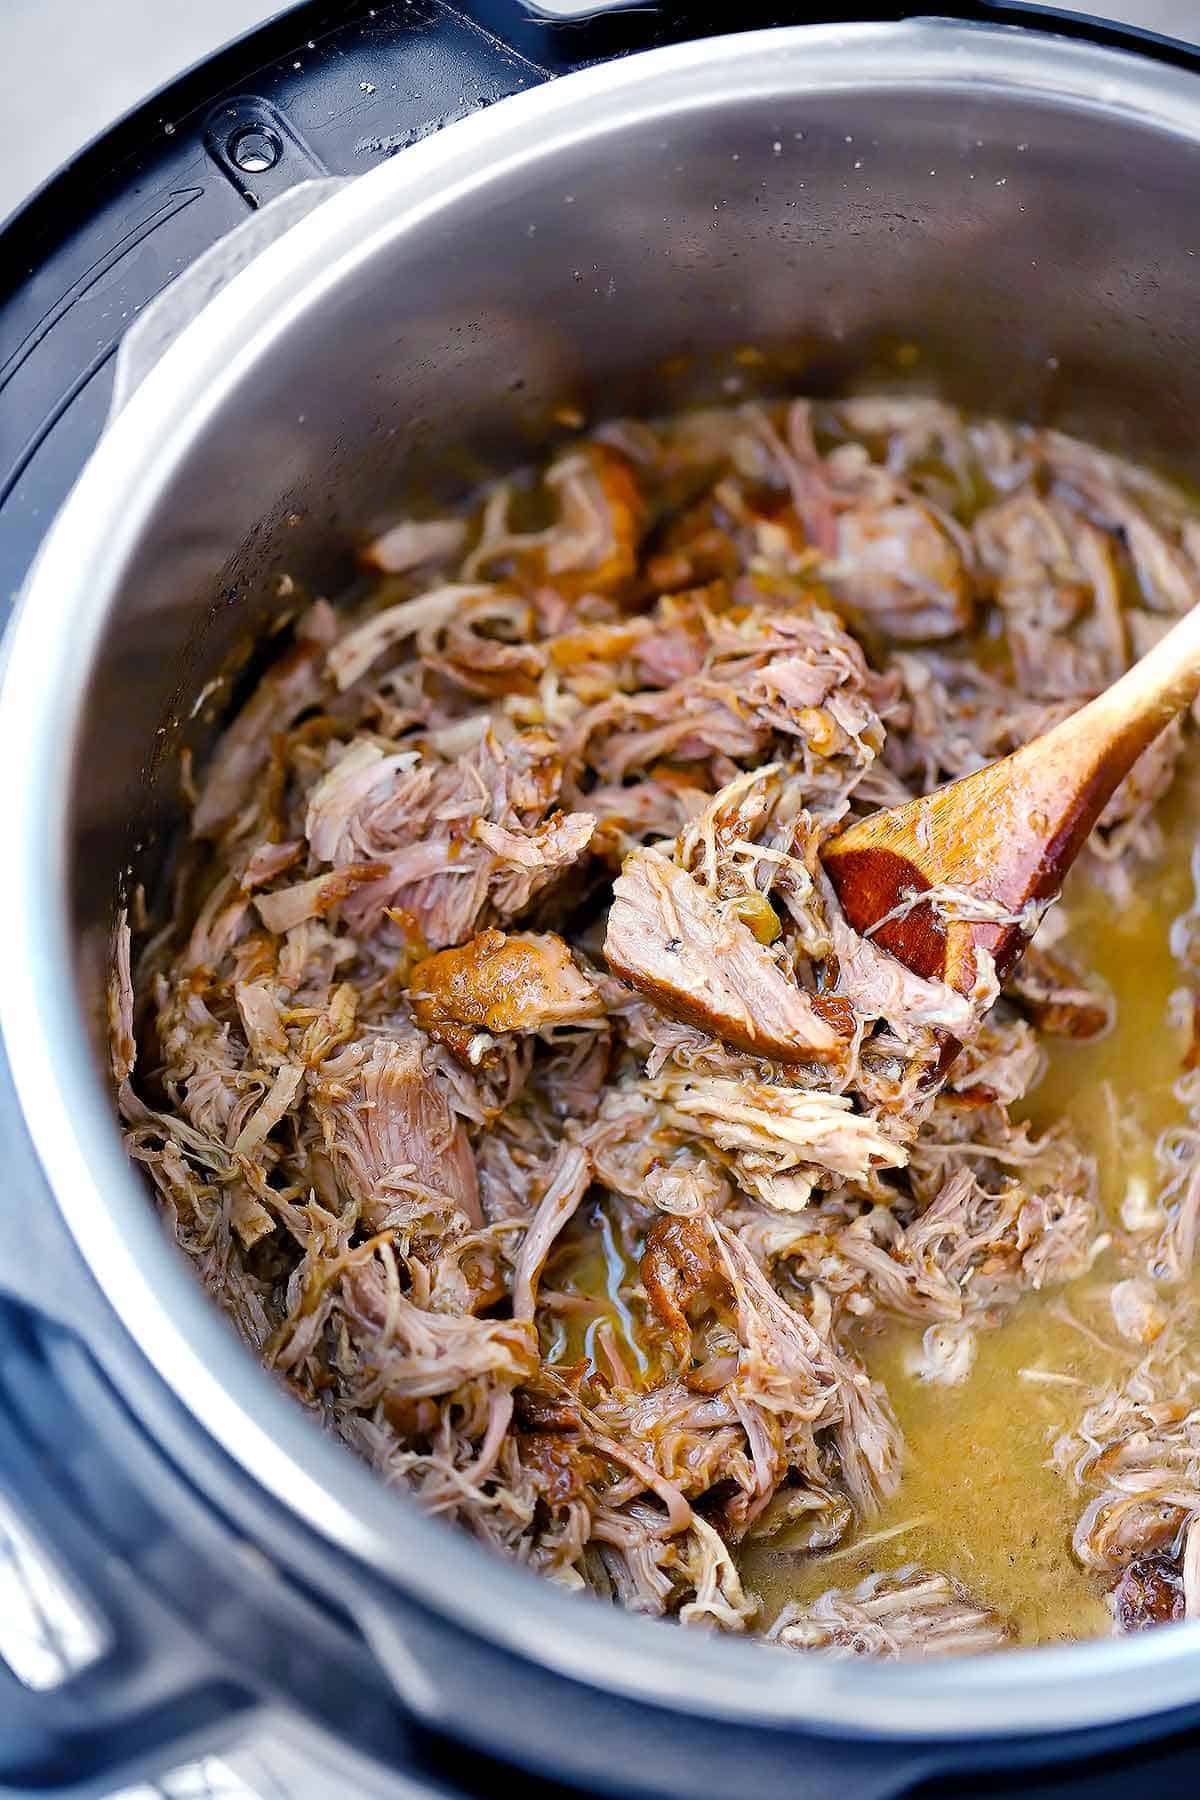 Pulled pork in an instant pot.